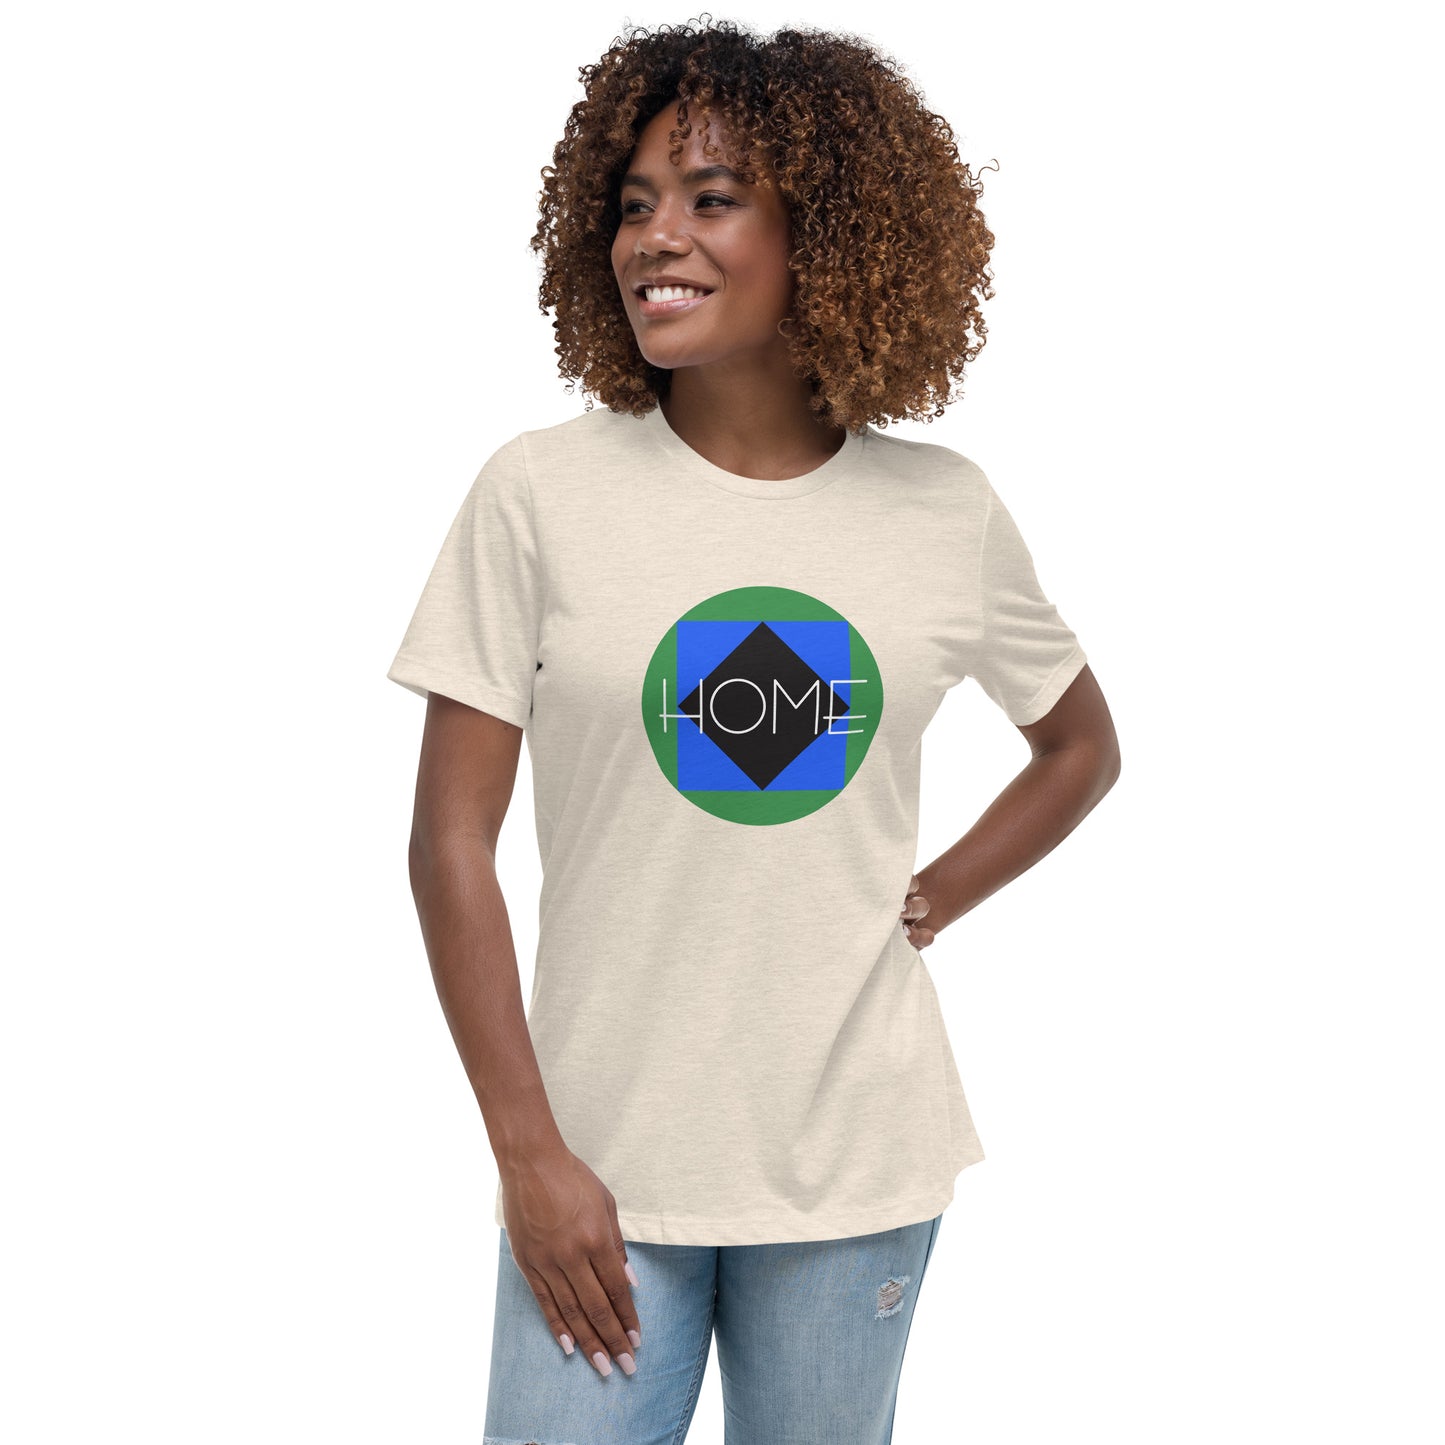 CS0023 - 02001 - Trail Icons Home Women's Relaxed T-Shirt